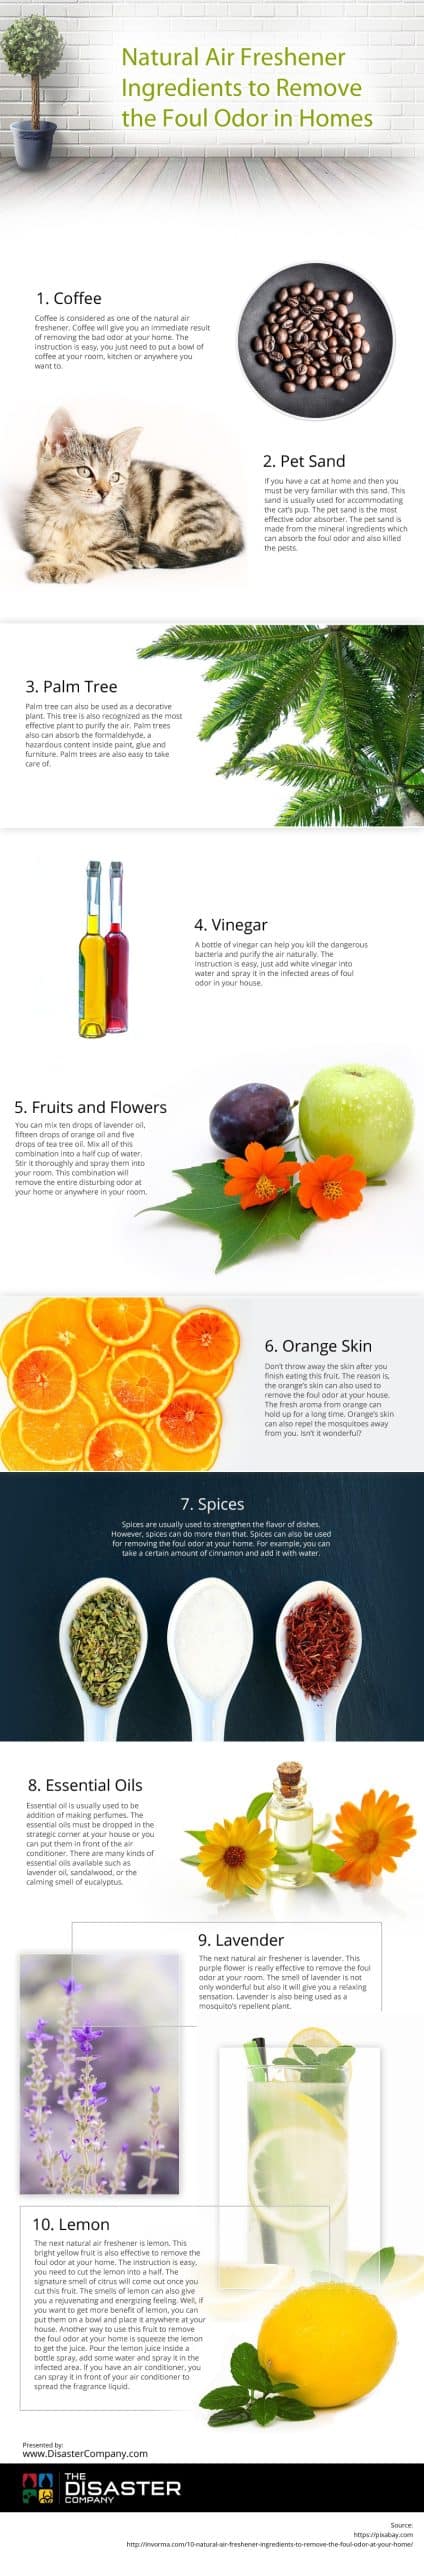 Natural Air Freshener Ingredients to Remove the Foul Odor in Homes [infographic]